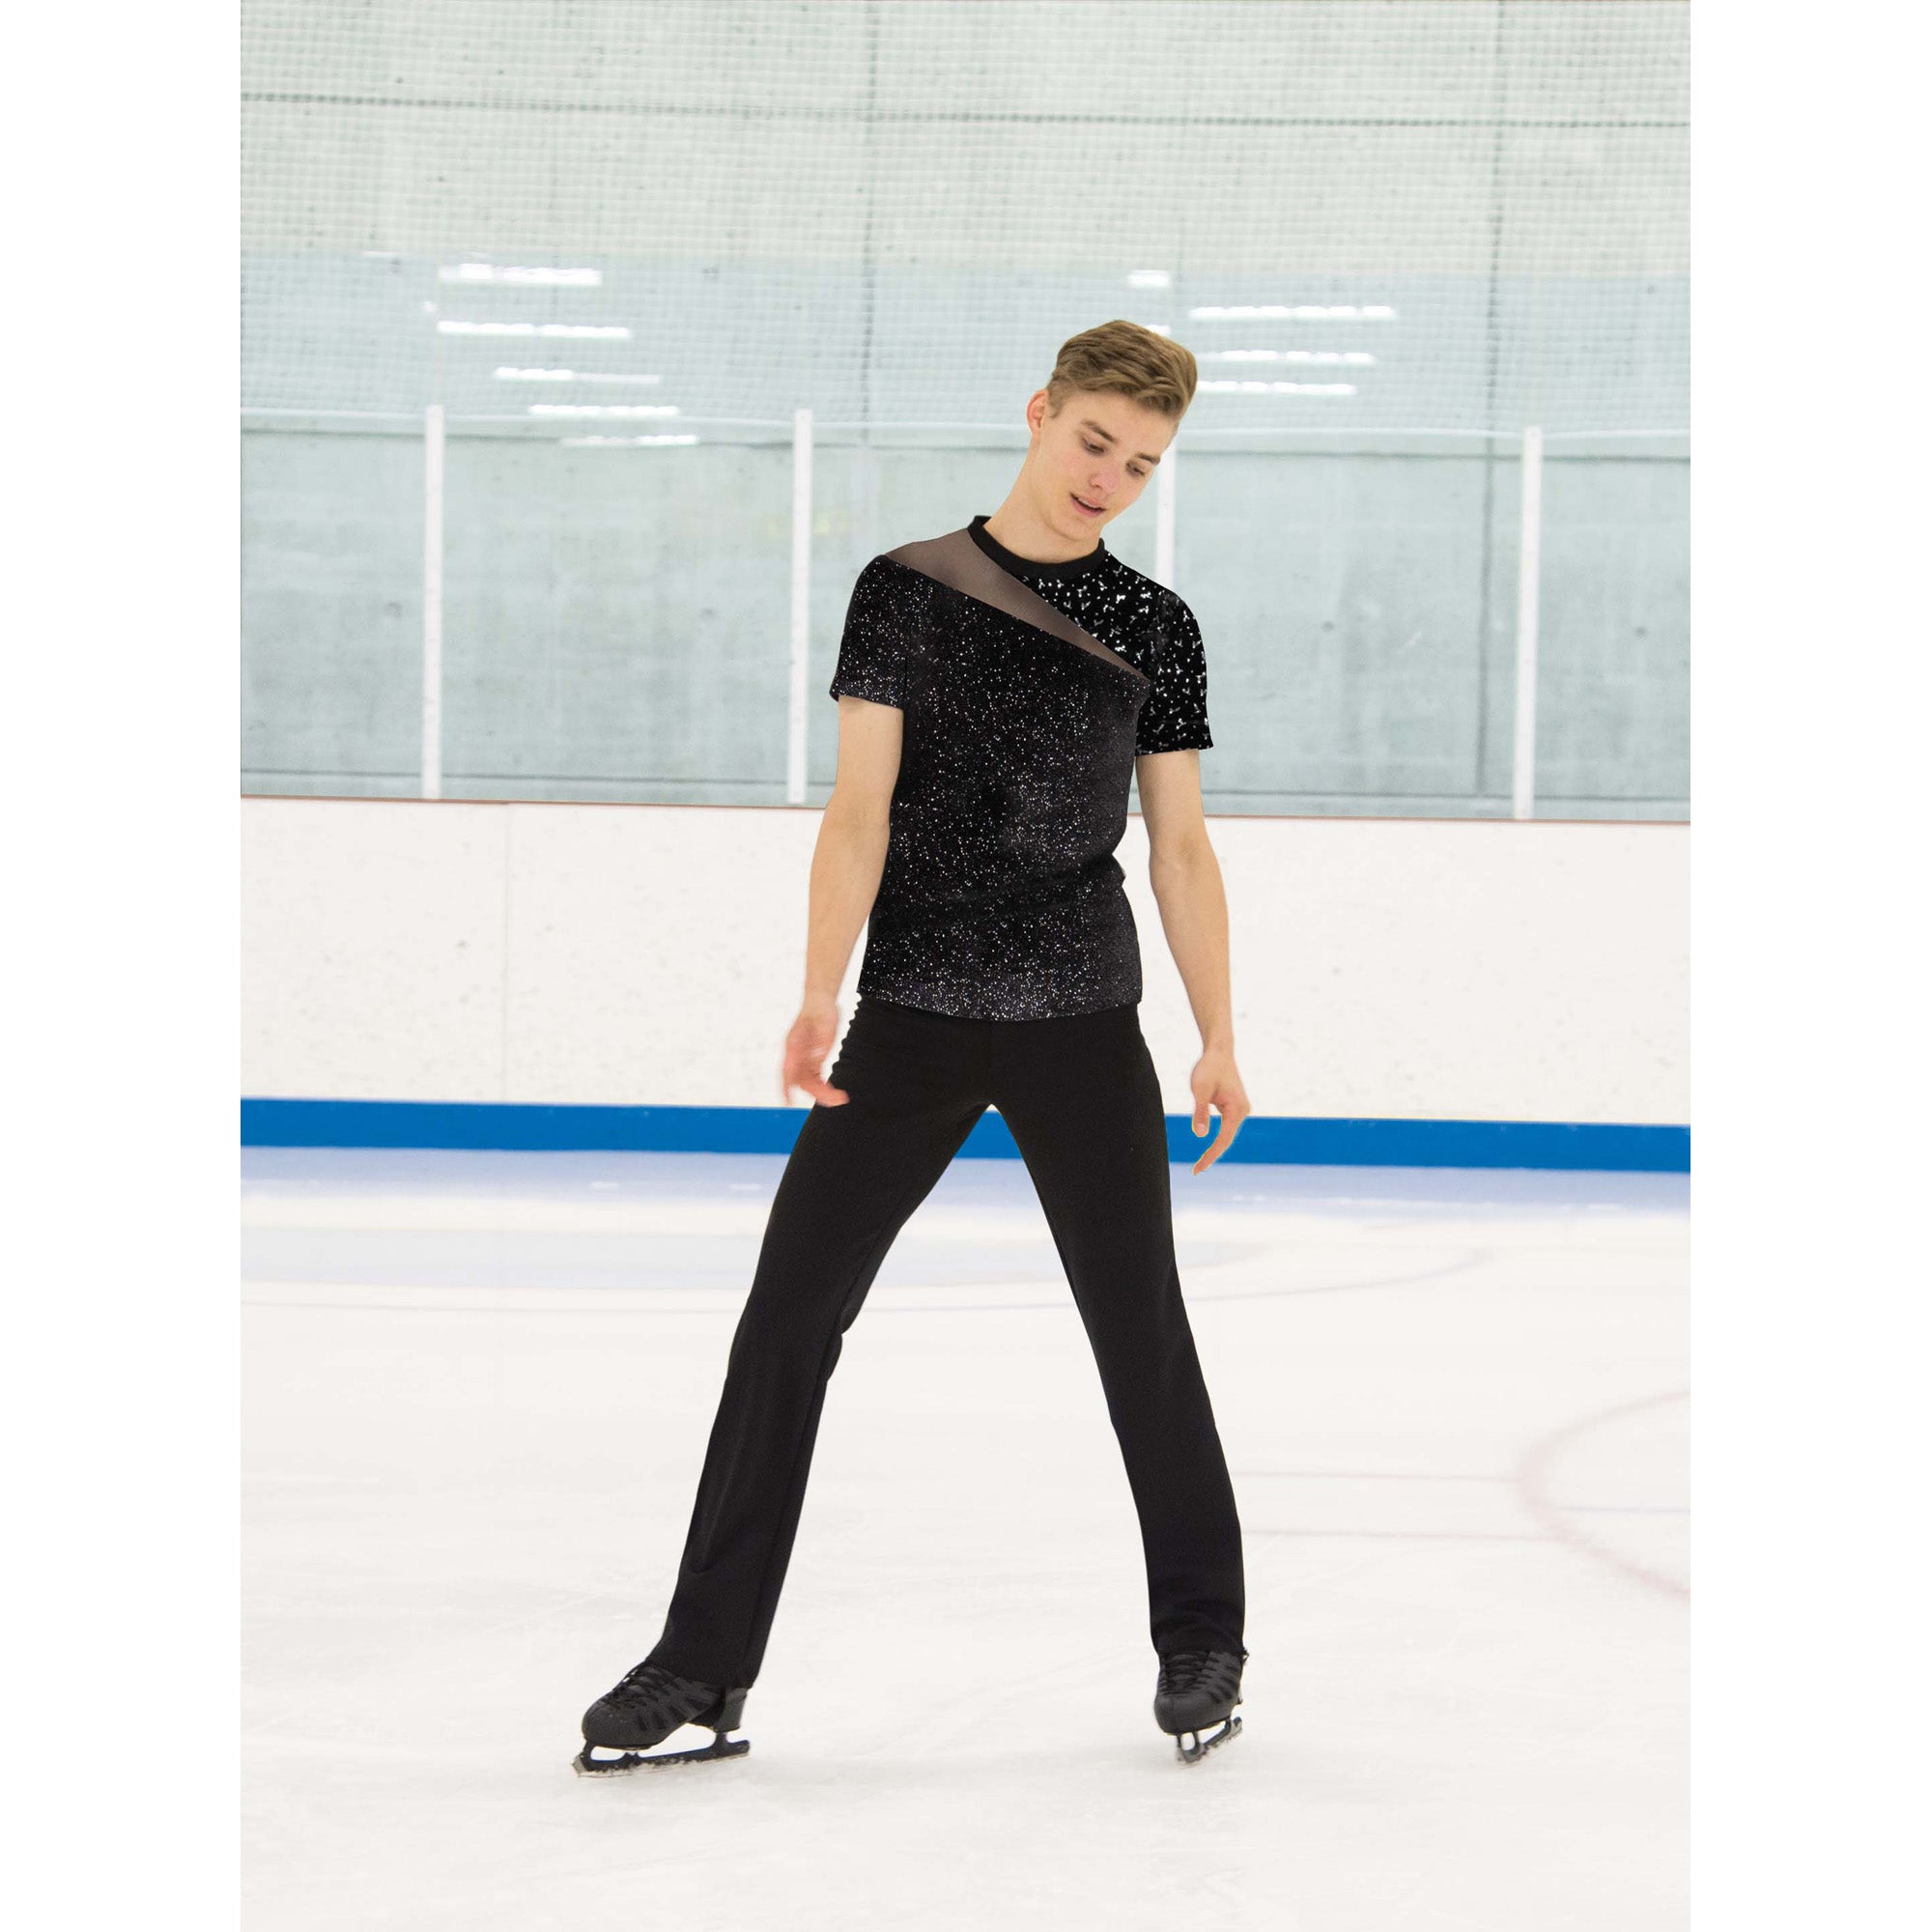 841 Mens Silver Slice Skating Top by Jerry's